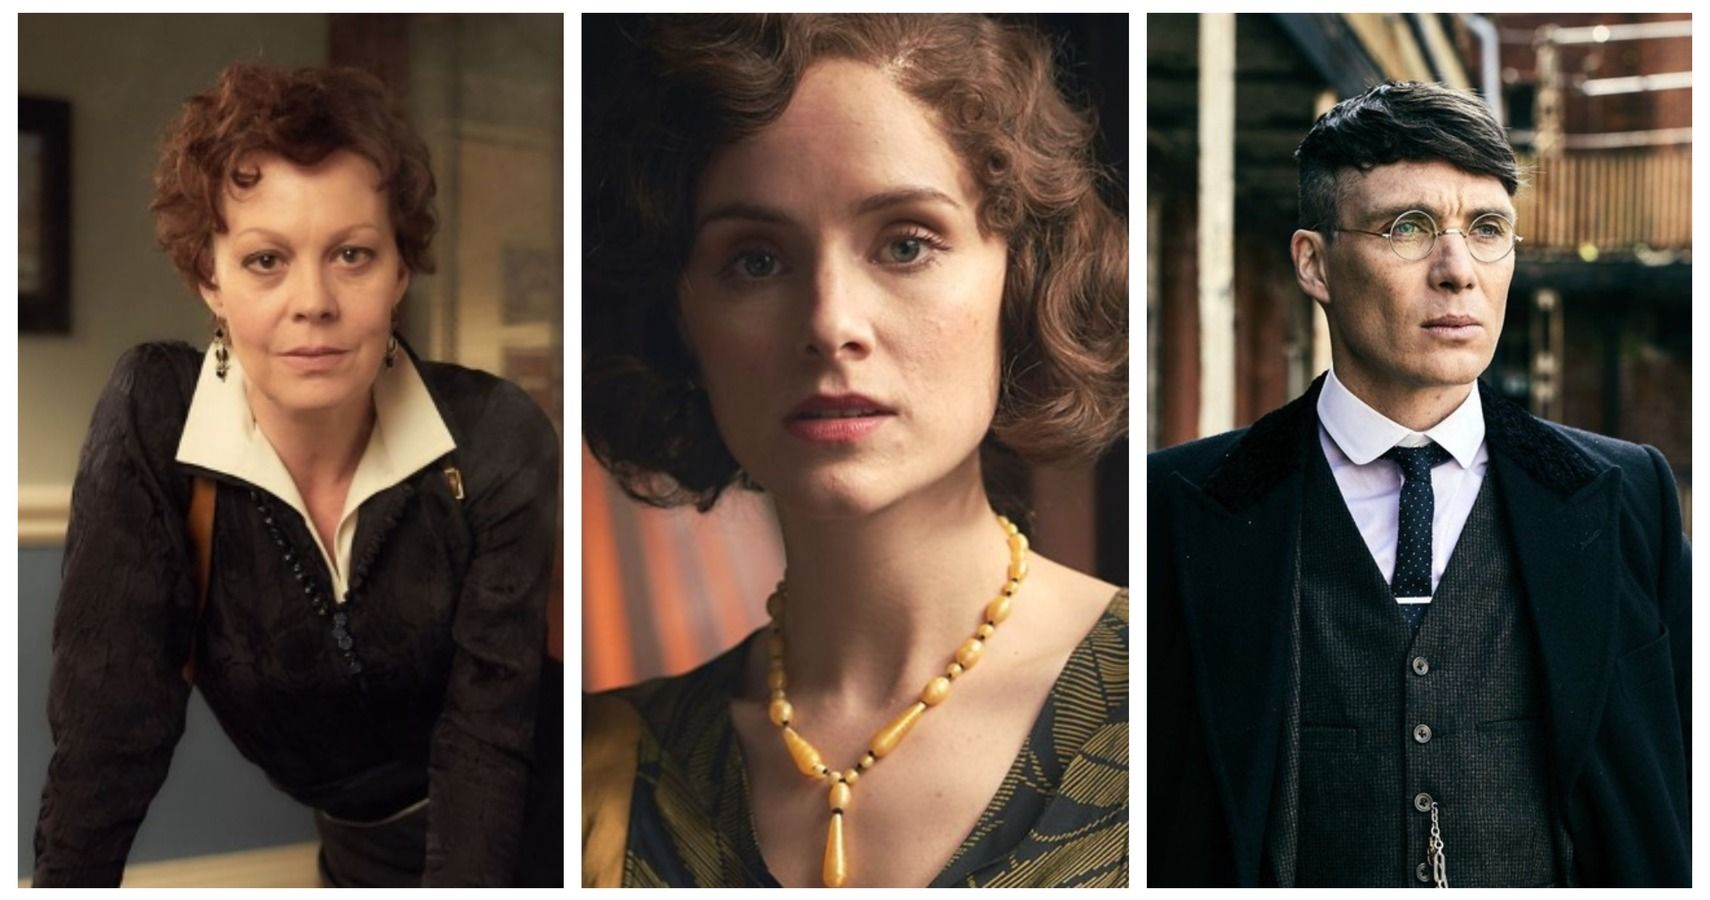 Peaky Blinders The Main Characters Ranked By Likability